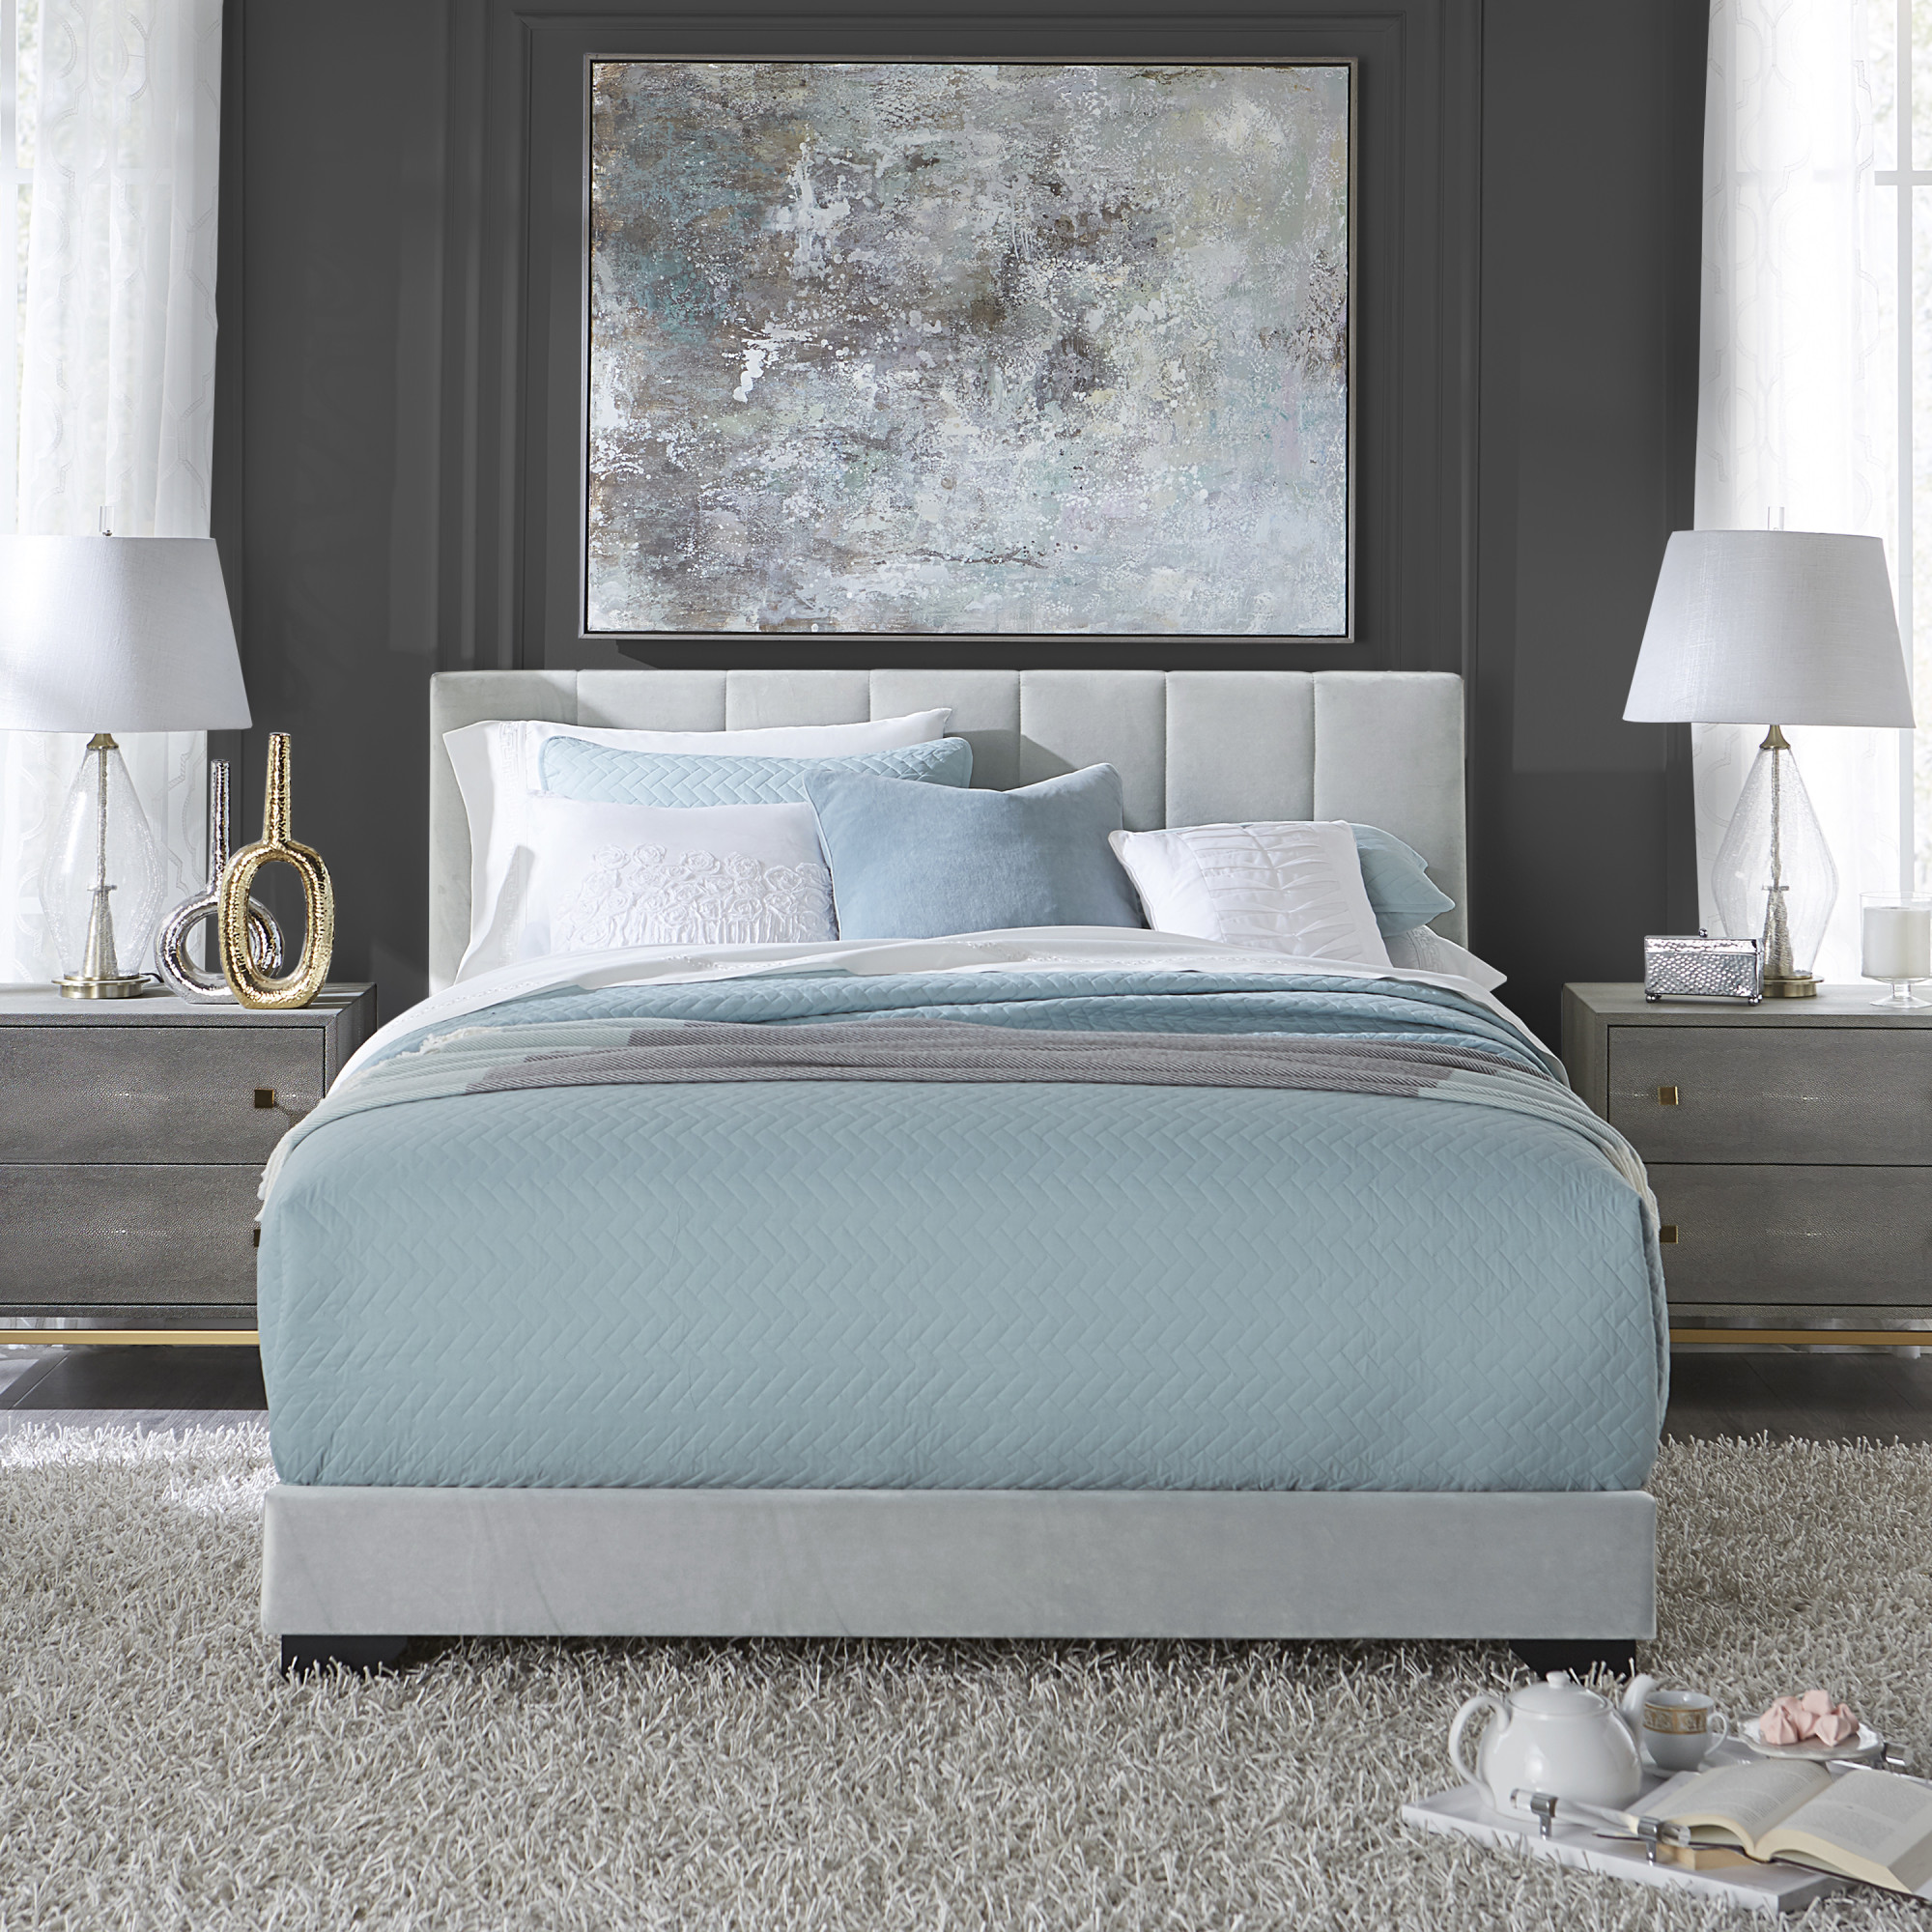 Reece Channel Stitched Upholstered Queen Bed, Platinum Gray, by Hillsdale Living Essentials - image 3 of 14